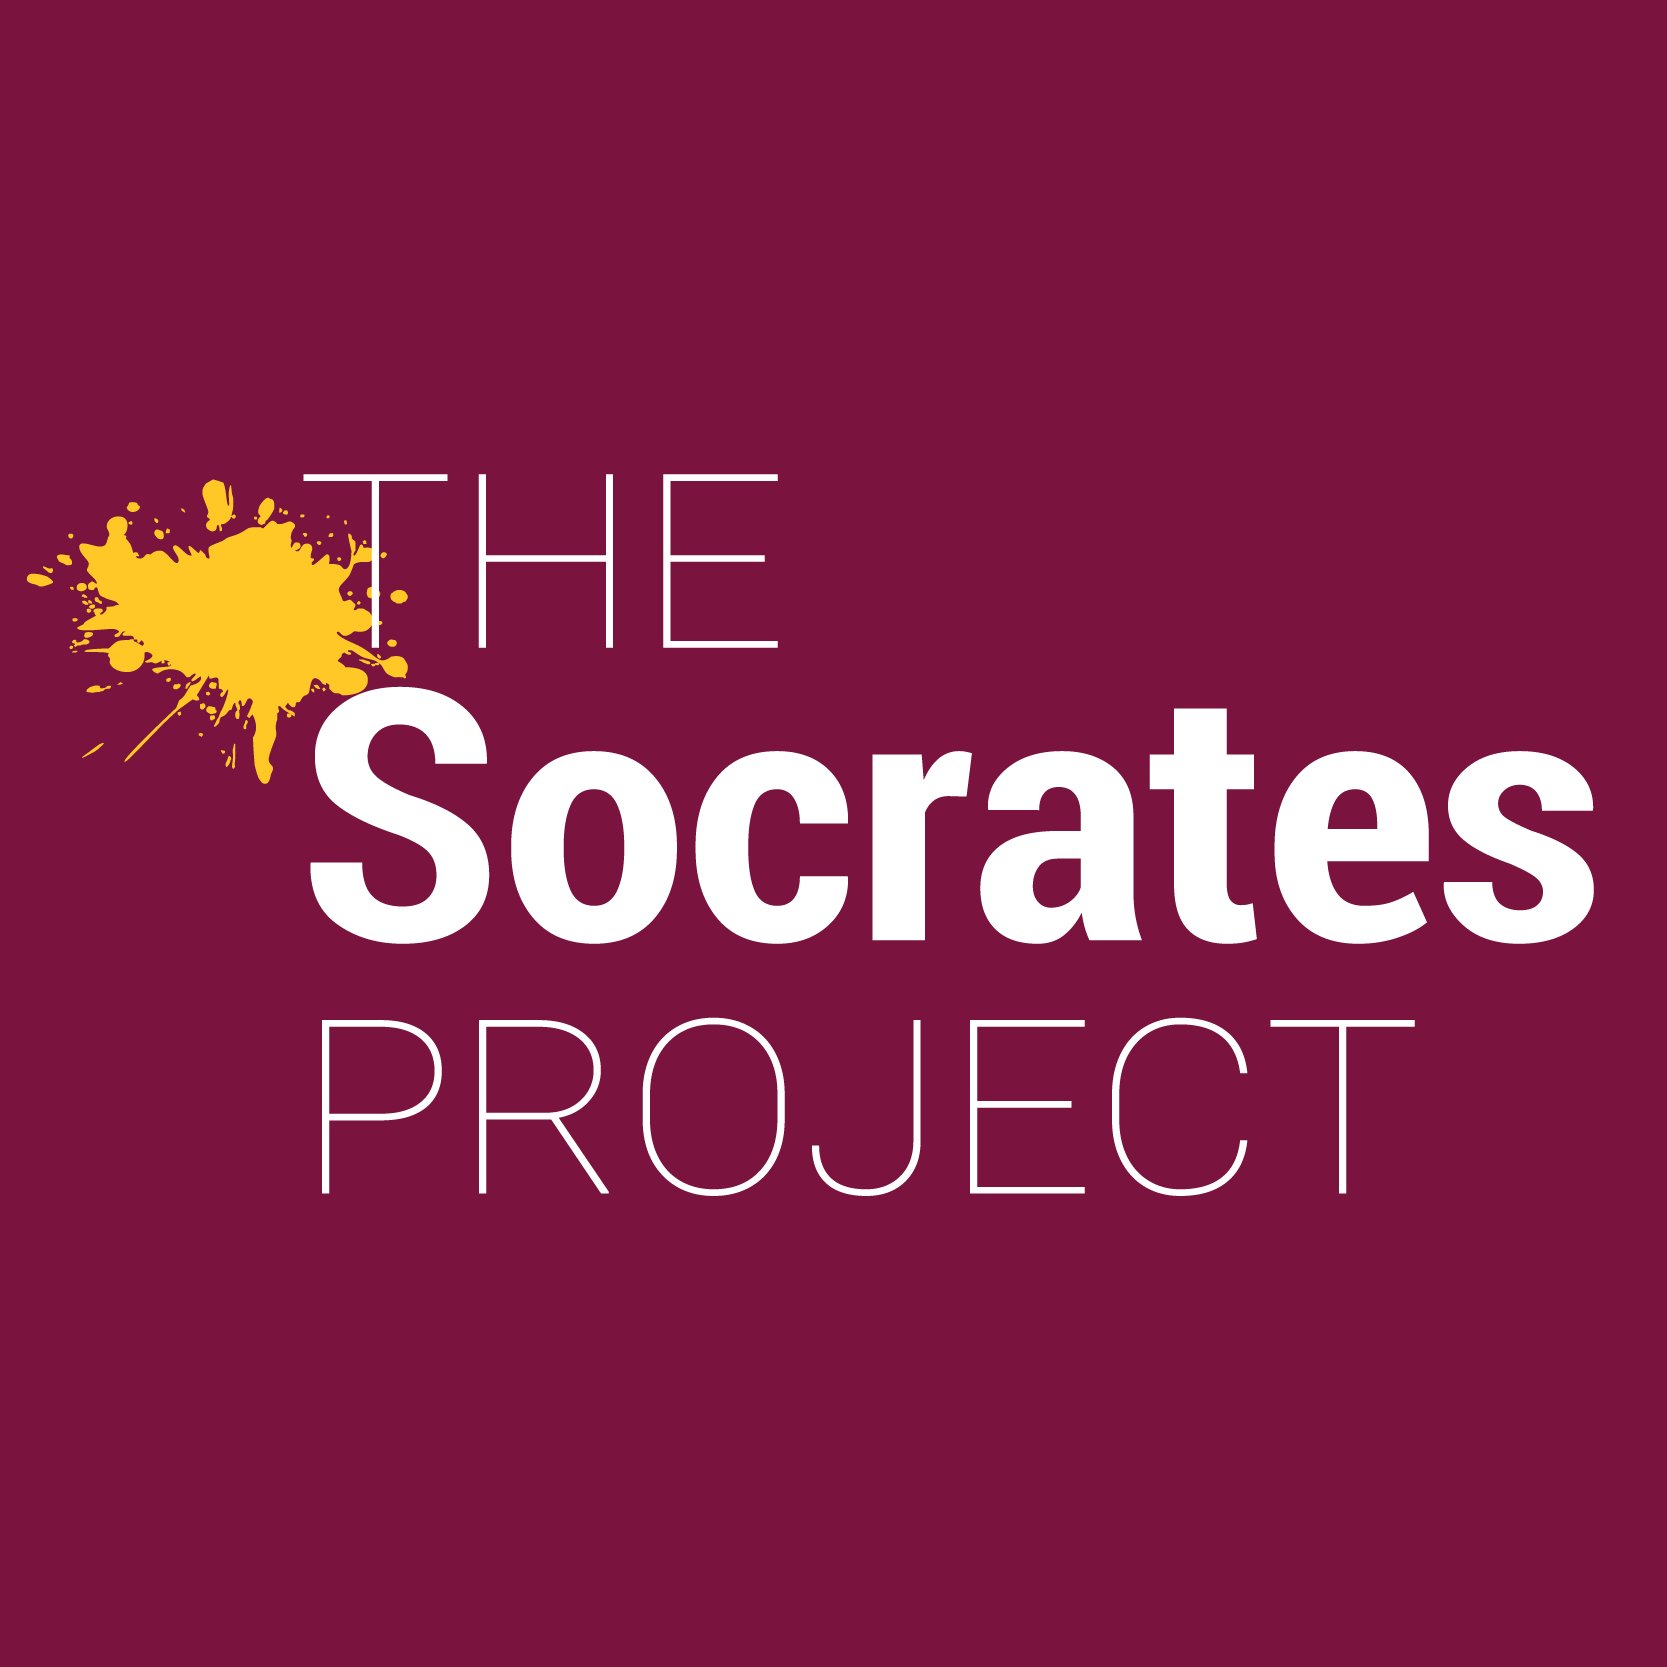 Connecting with the world's most pressing issues through inquiry, imagination, scholarship & dialogue
Official Twitter account of #TheSocratesProject @McMasterU